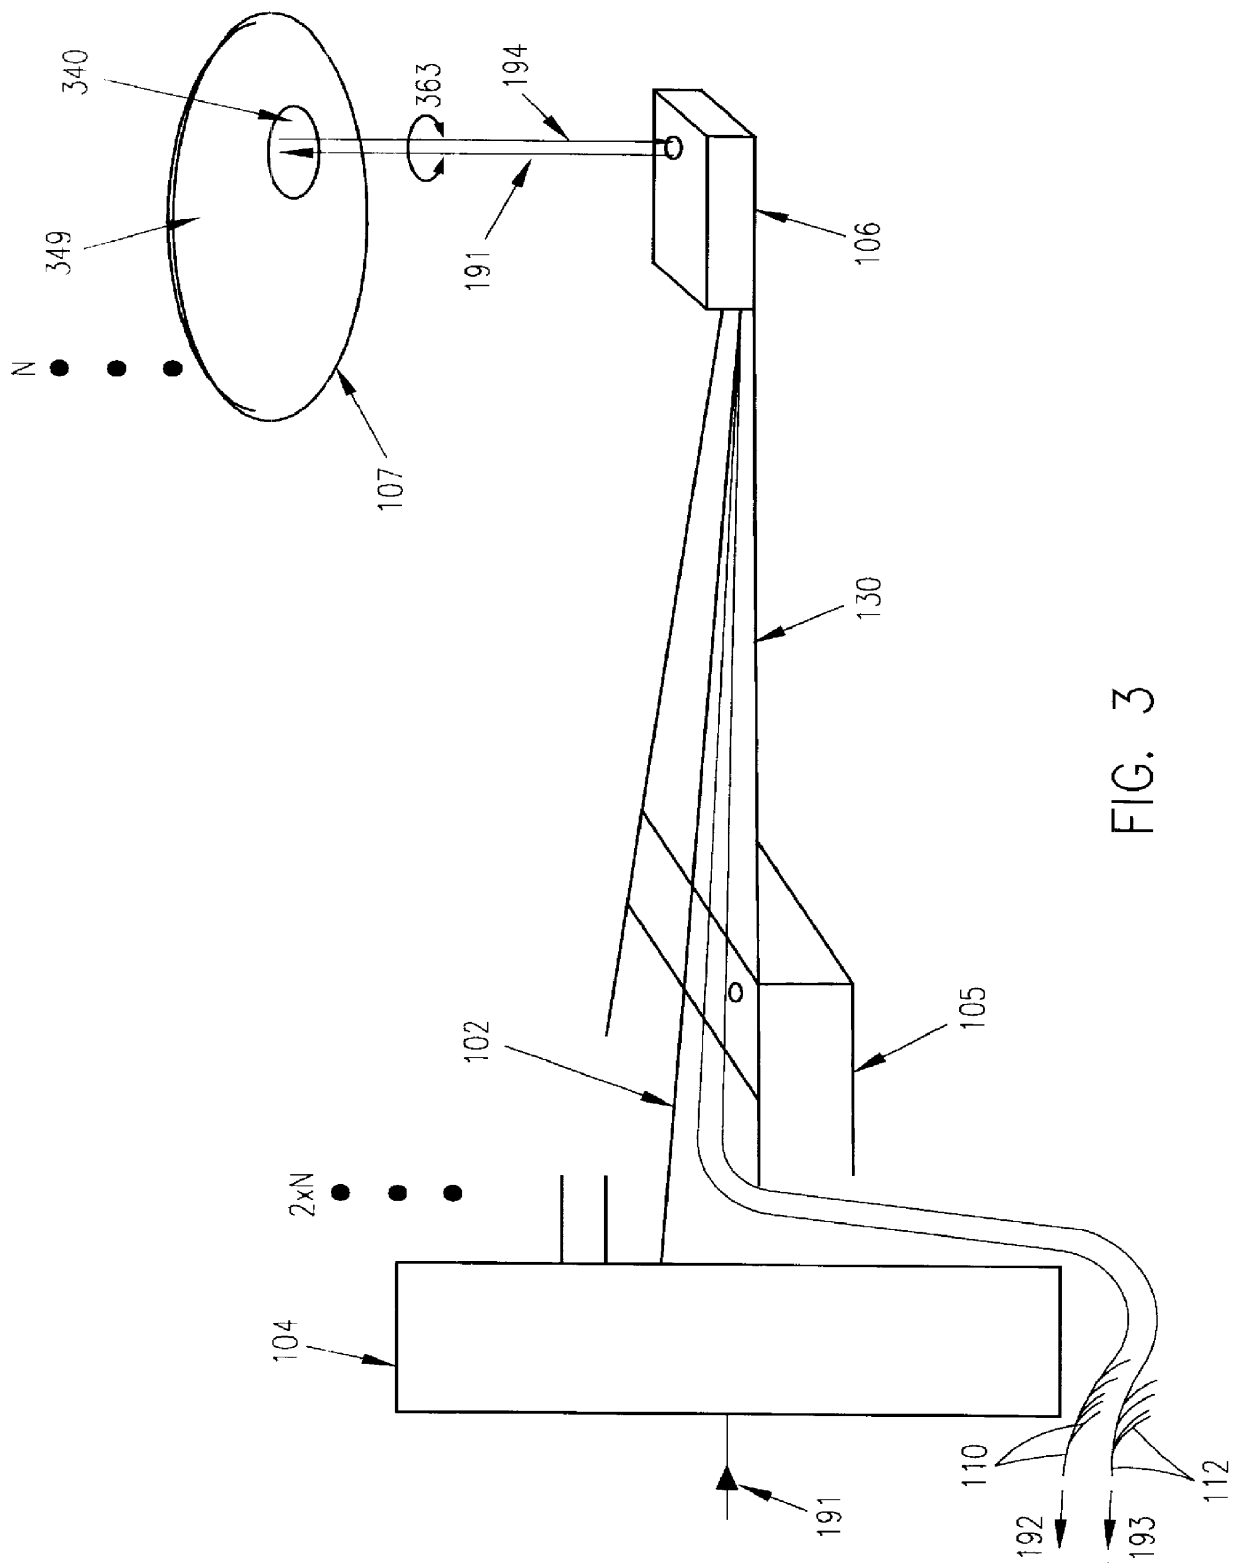 Data storage system having an optical processing flying head